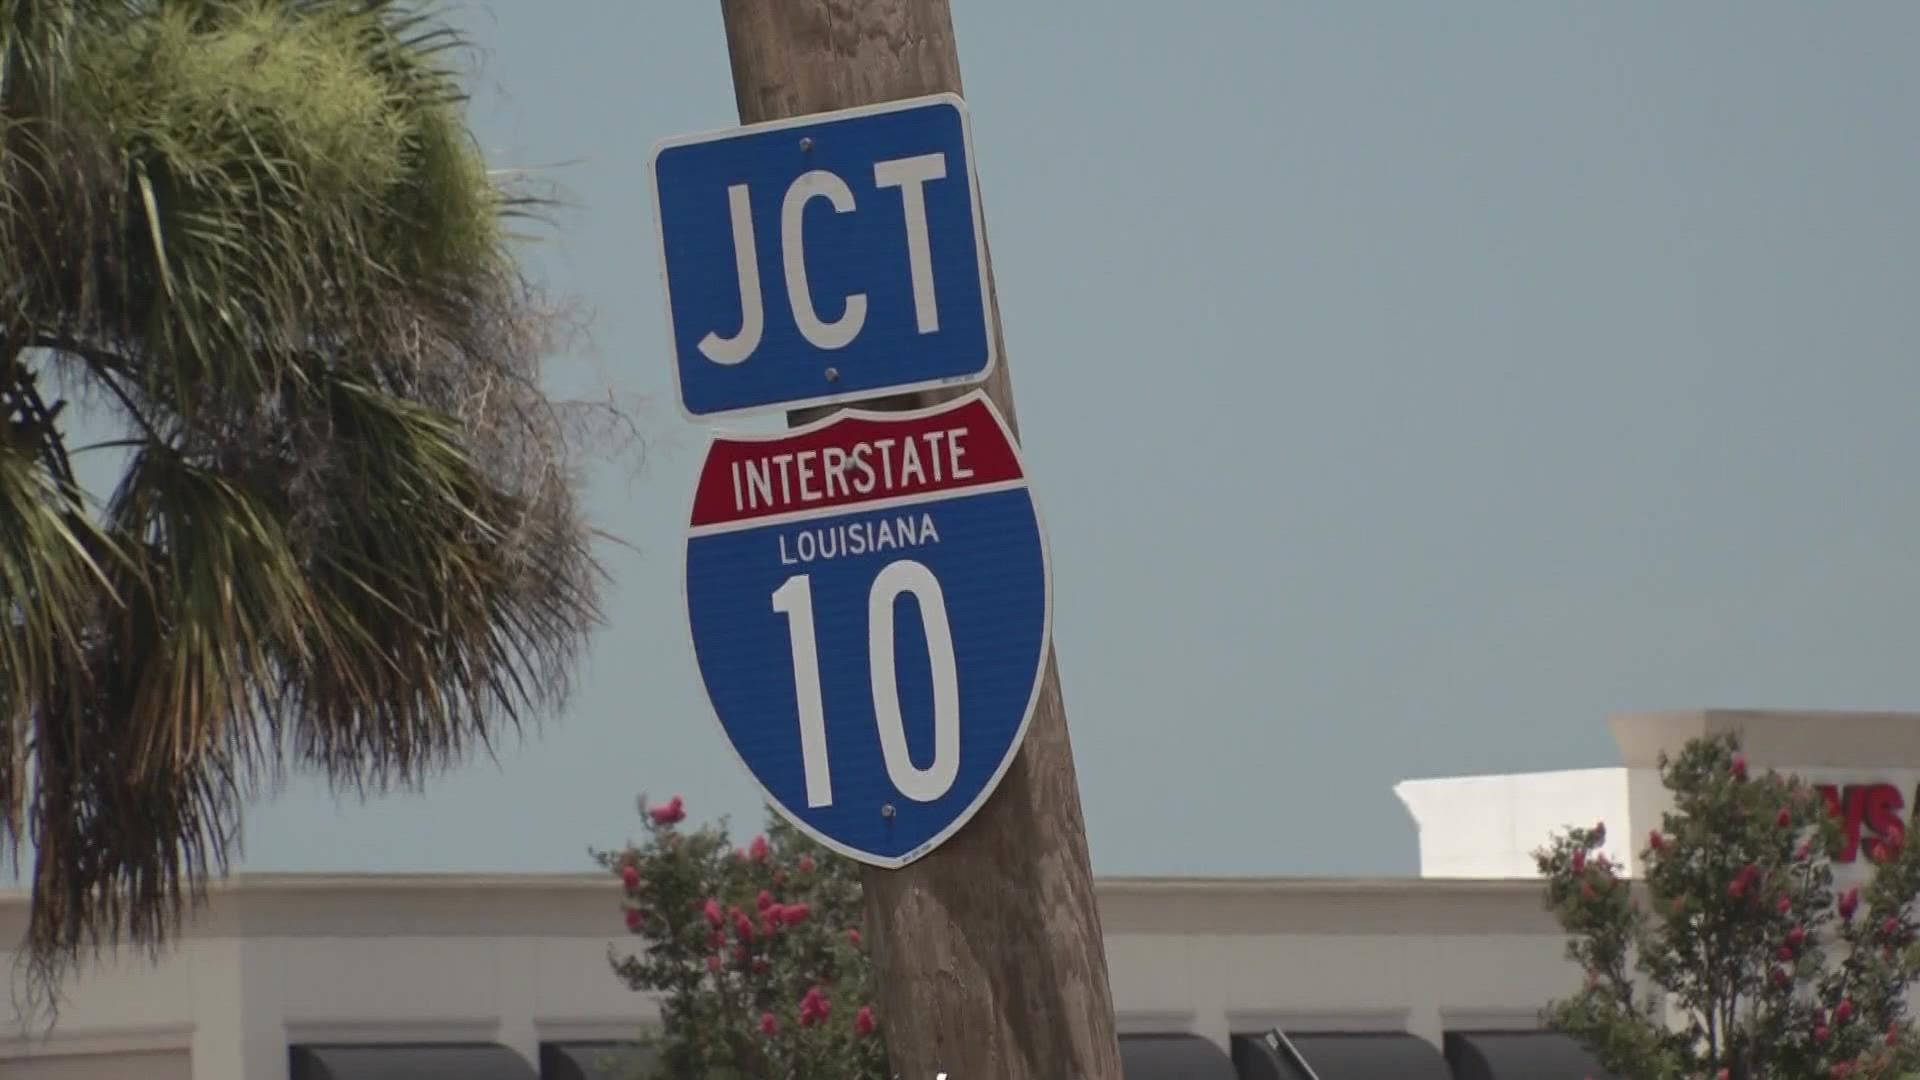 According to NOPD, no arrests have been made in any of the interstate shootings this year.